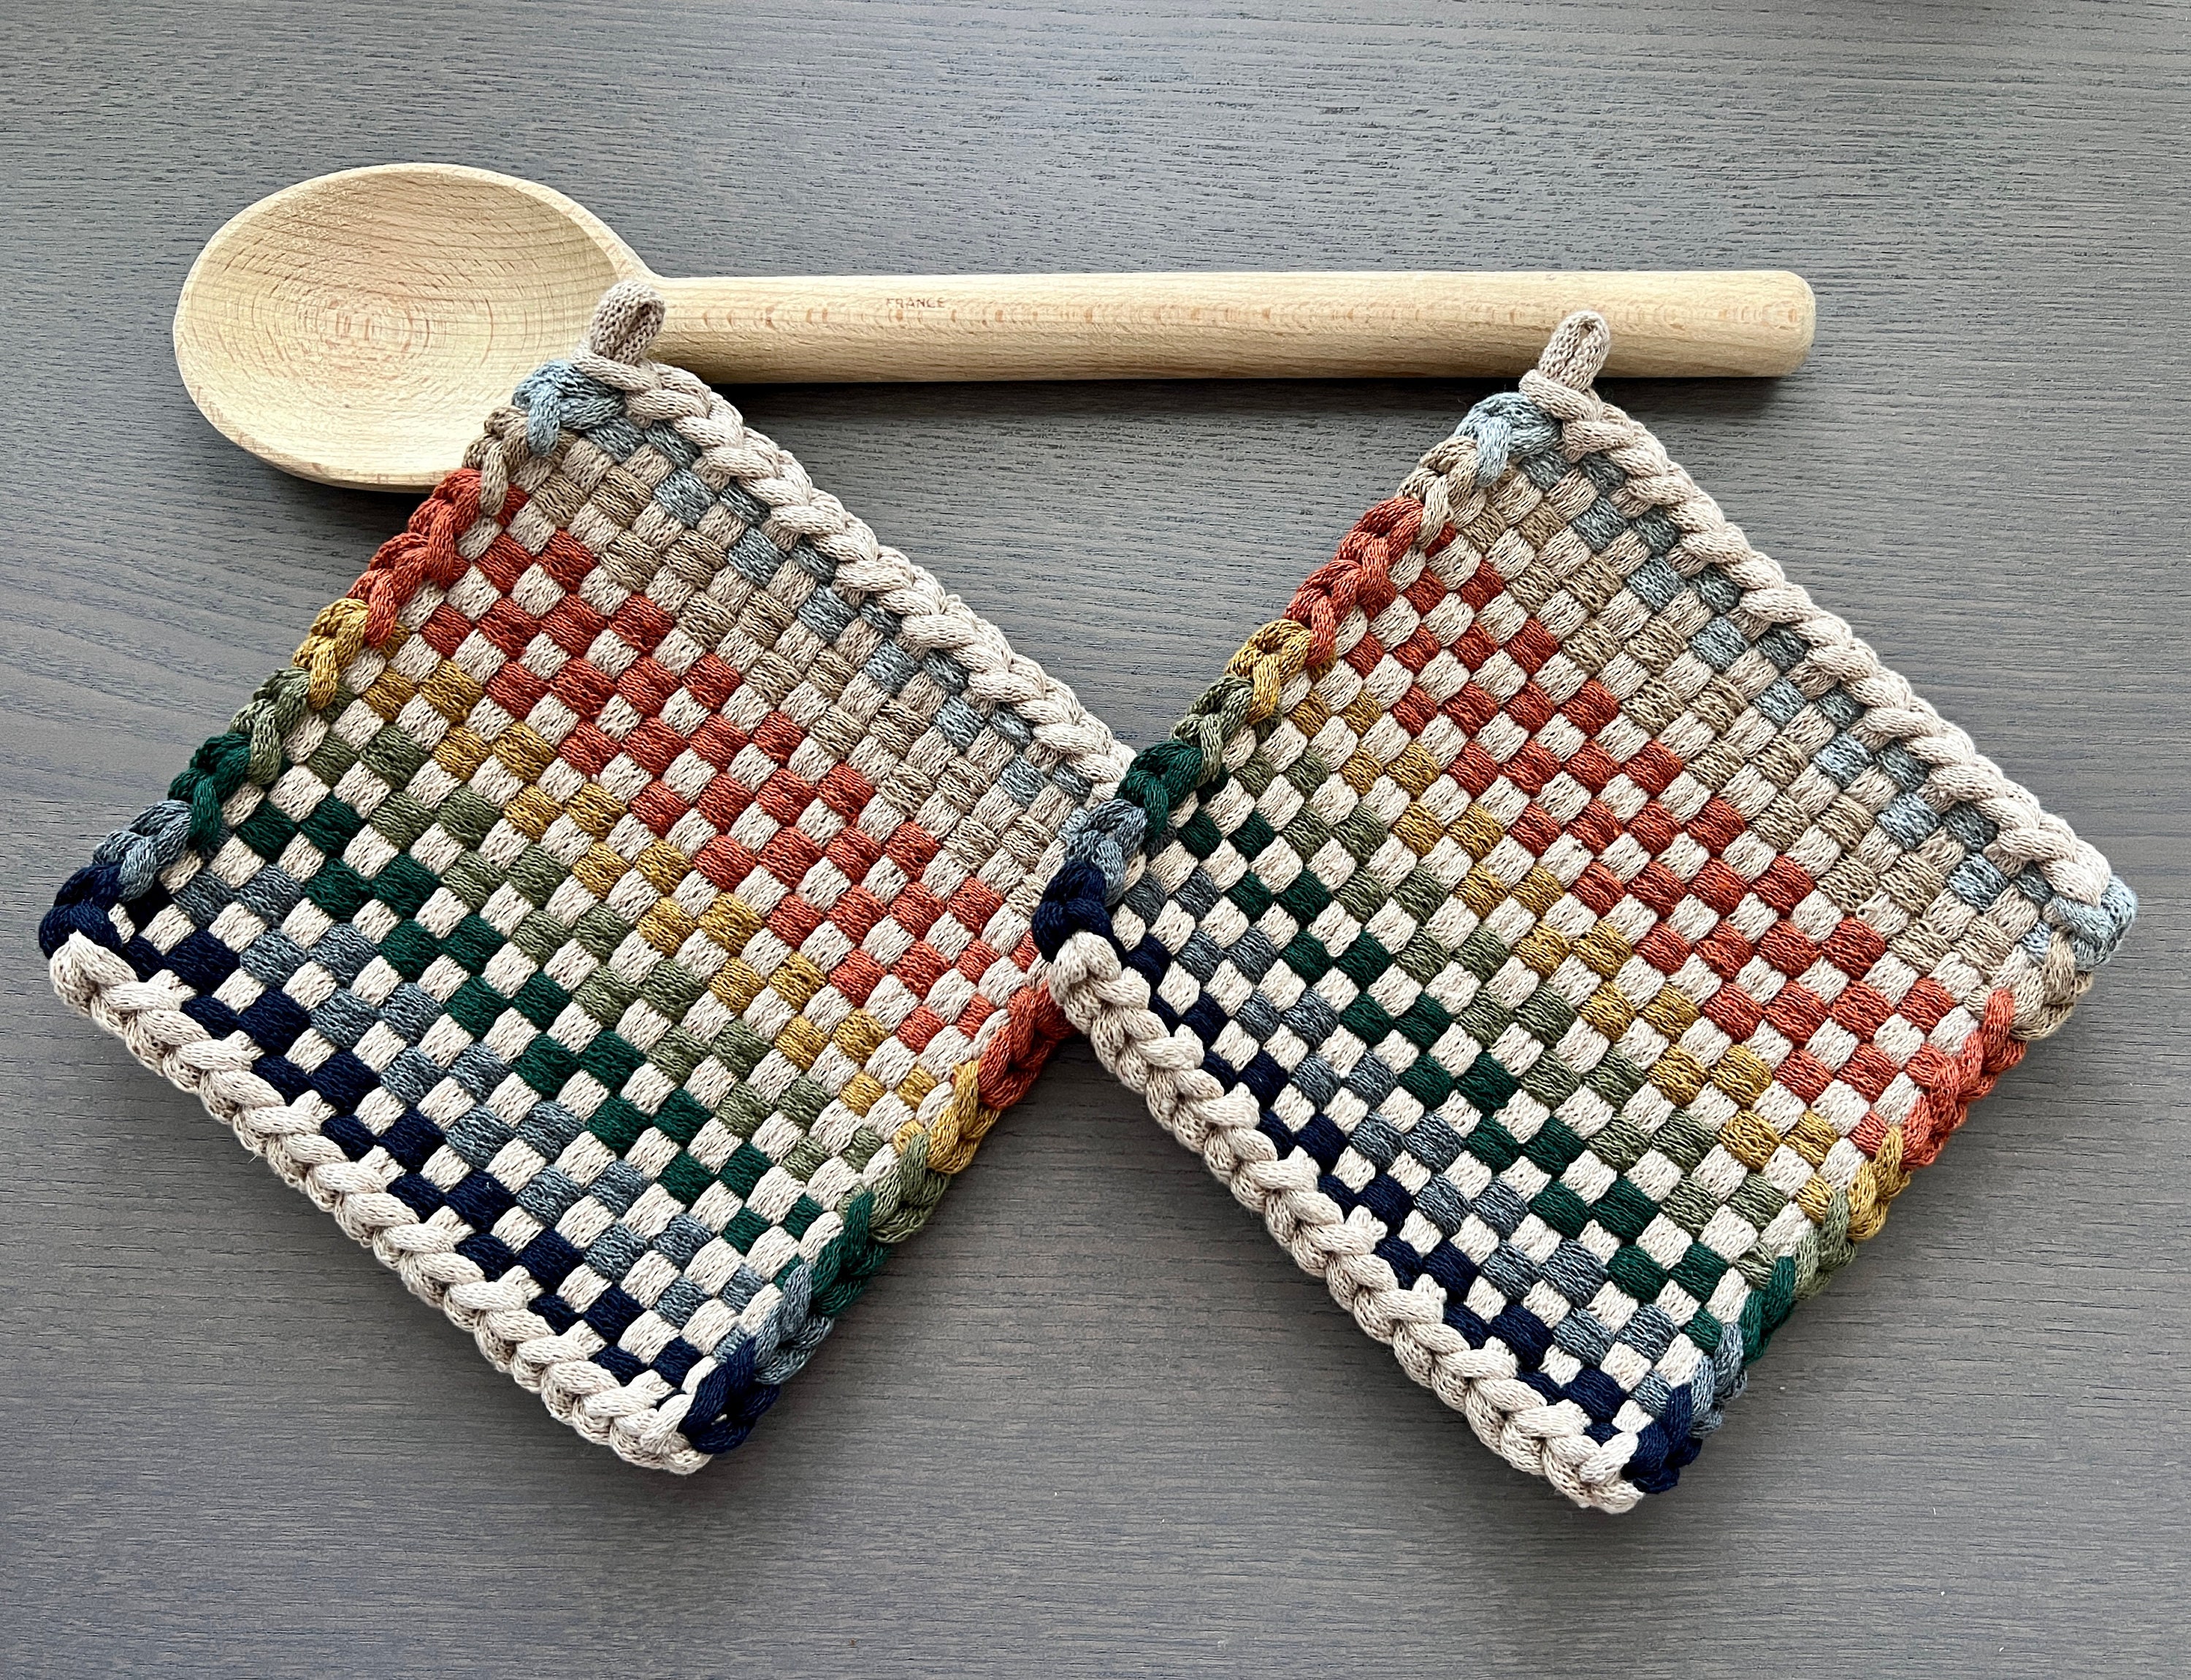 Boho Rainbow Butterflies Oven Mitts and Pot Holders Sets of 4